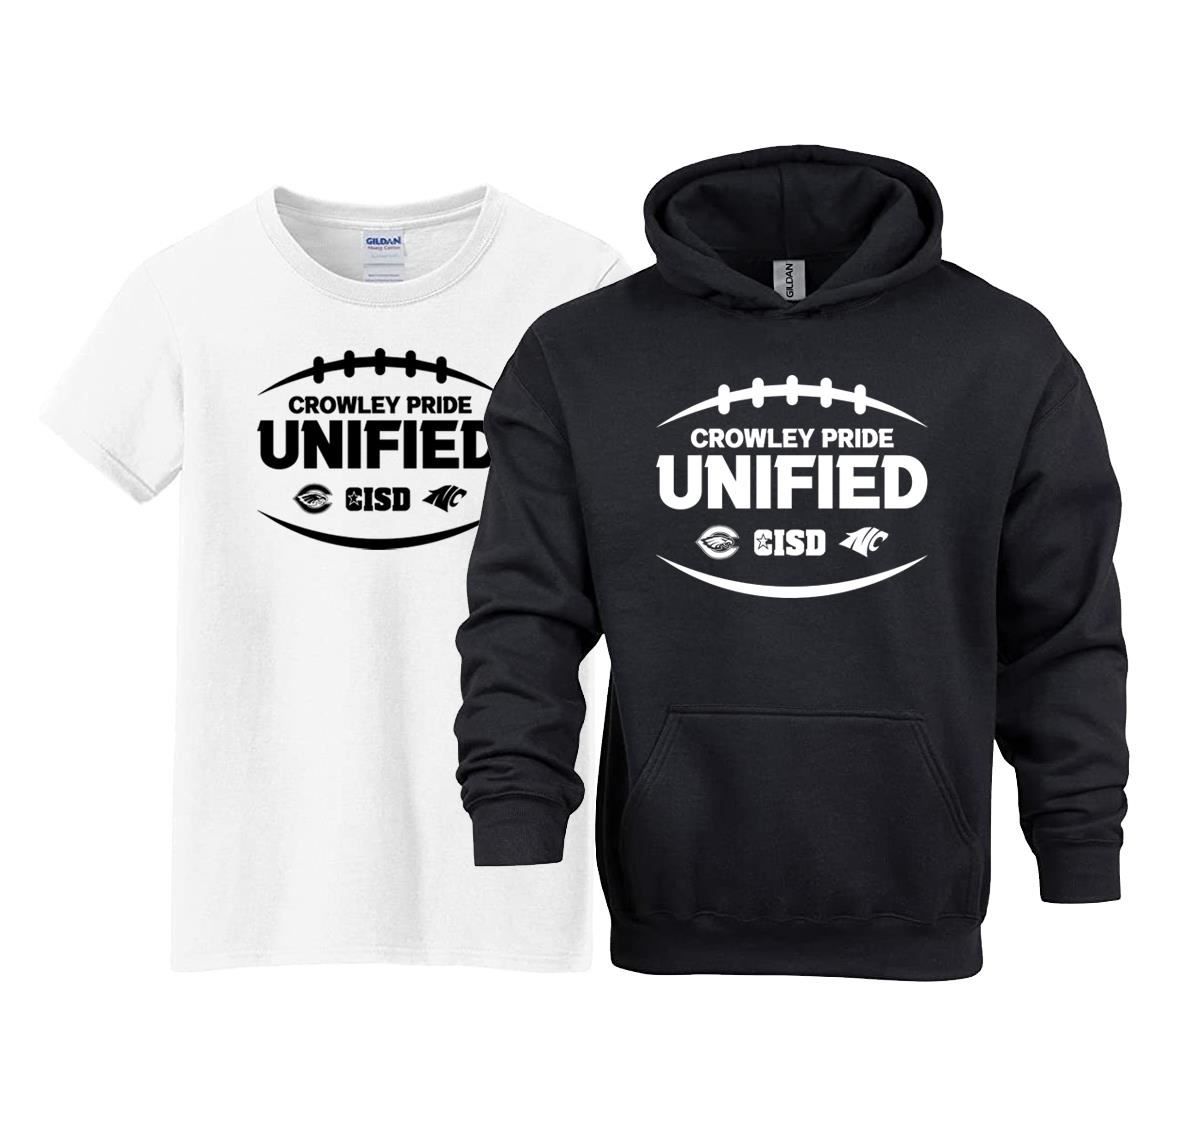 Crowley Pride Unified t-shirt and hooded sweatshirt